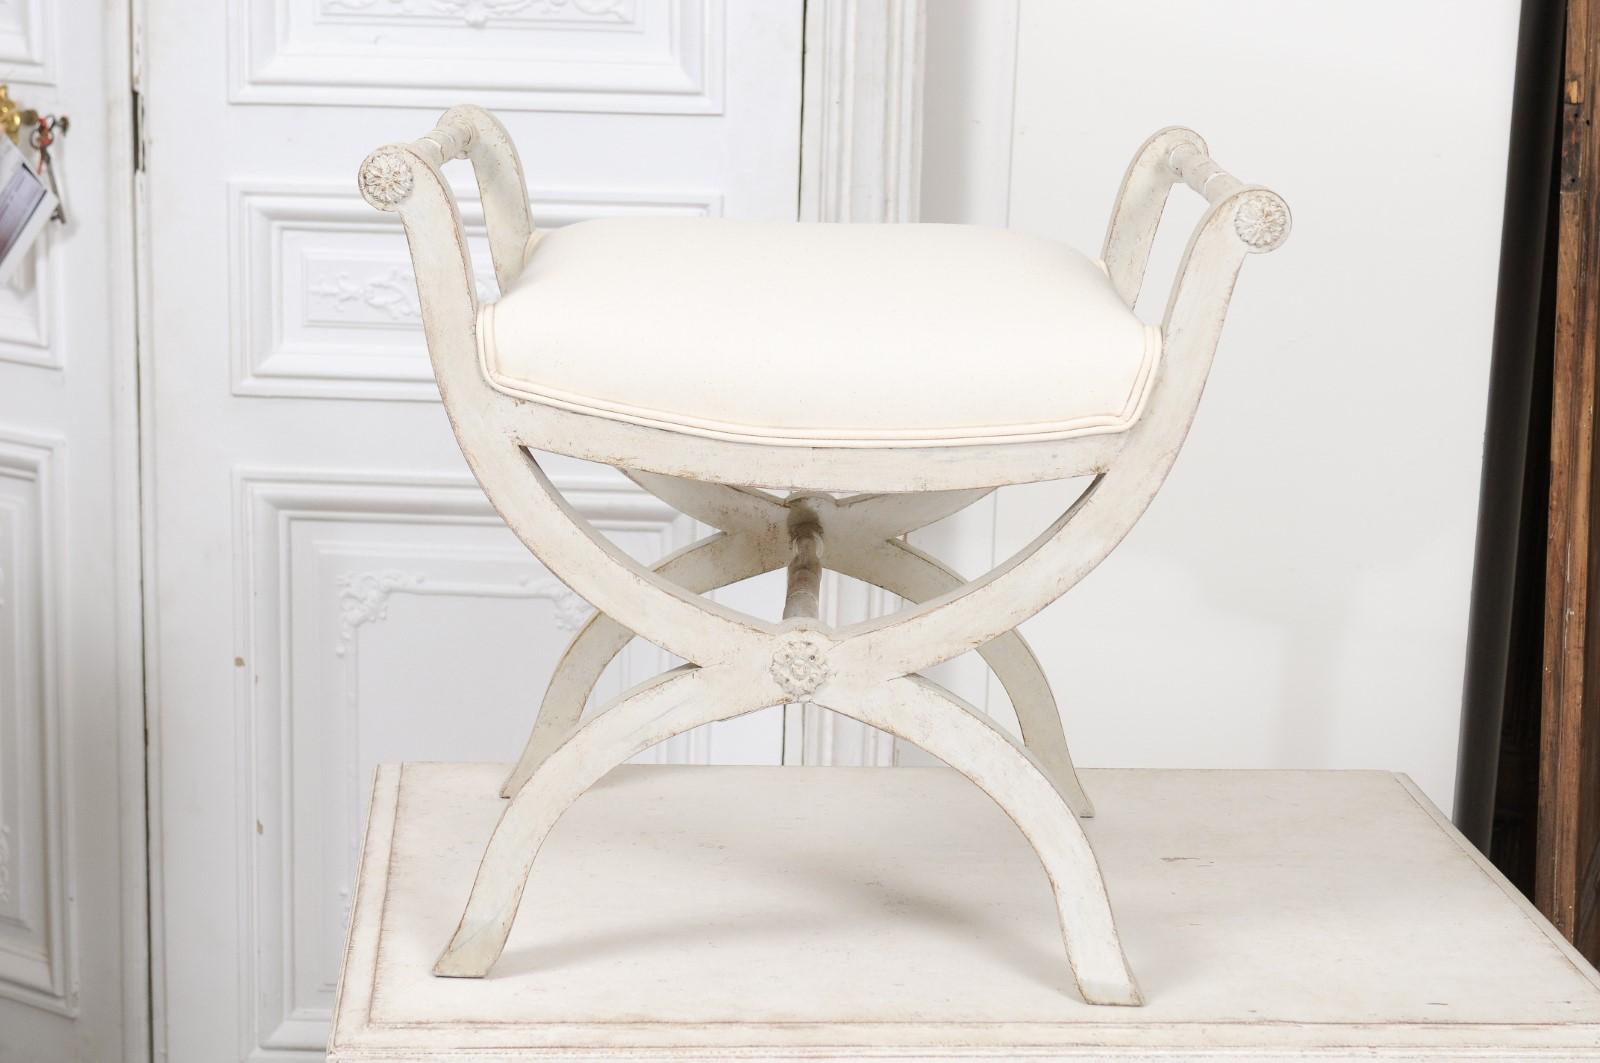 Swedish 1830s Empire Style Painted and Upholstered Stool with Spindle Arms For Sale 4